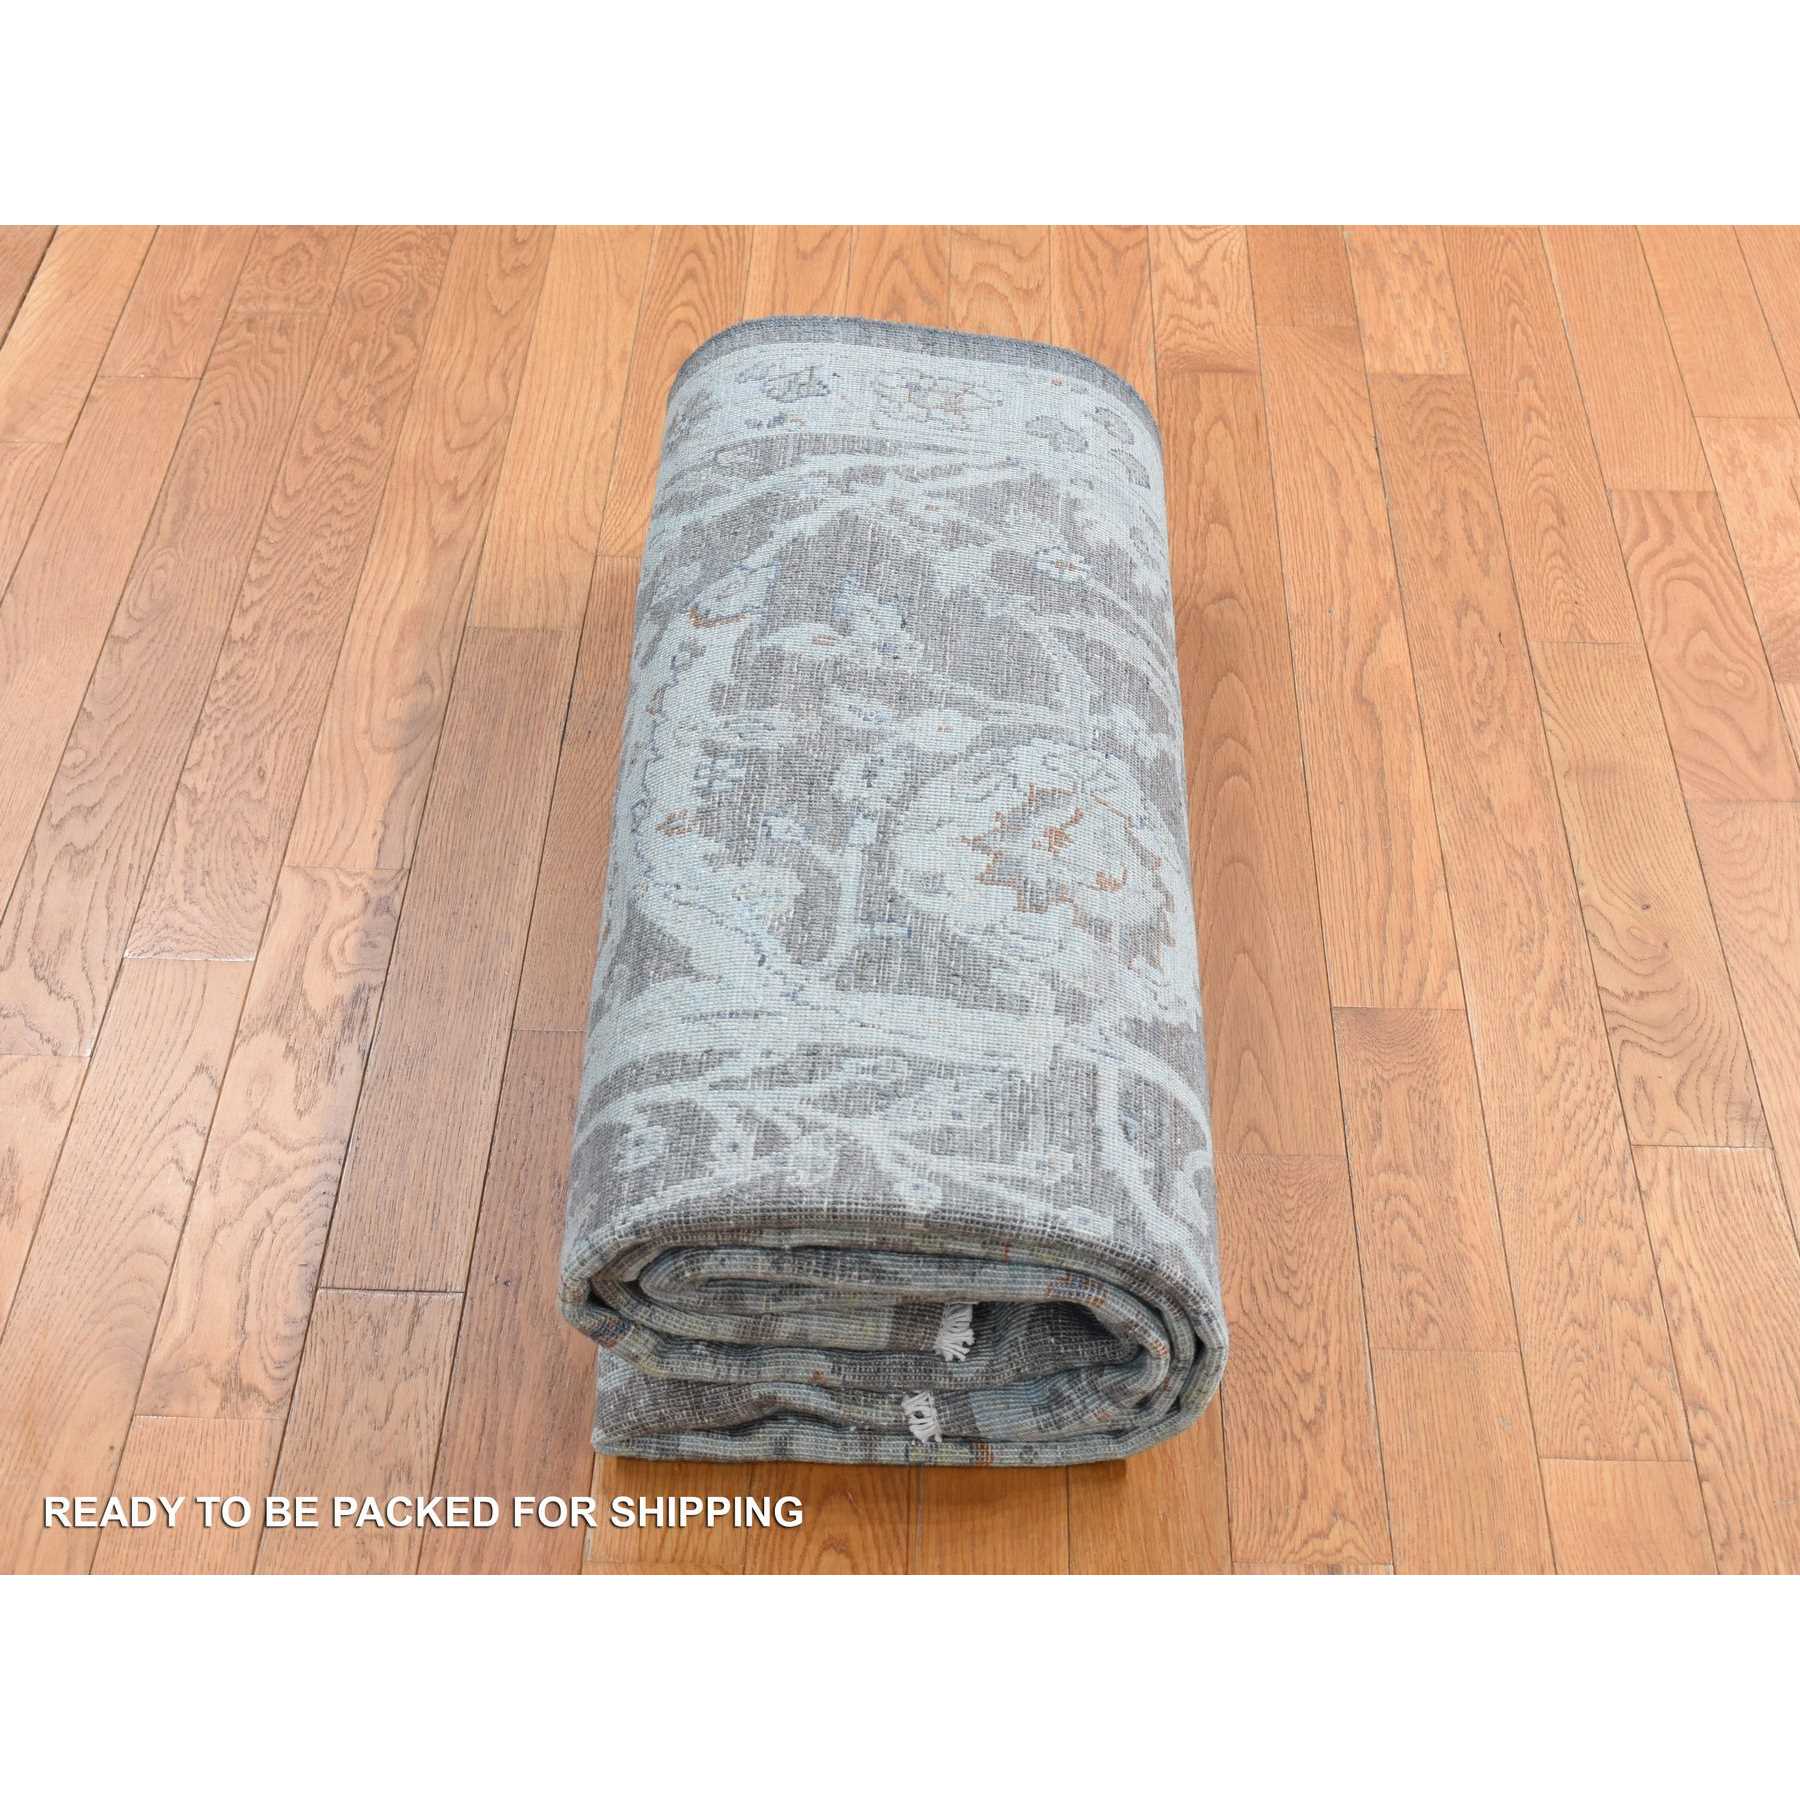 White-Wash-Vintage-Silver-Wash-Hand-Knotted-Rug-404585